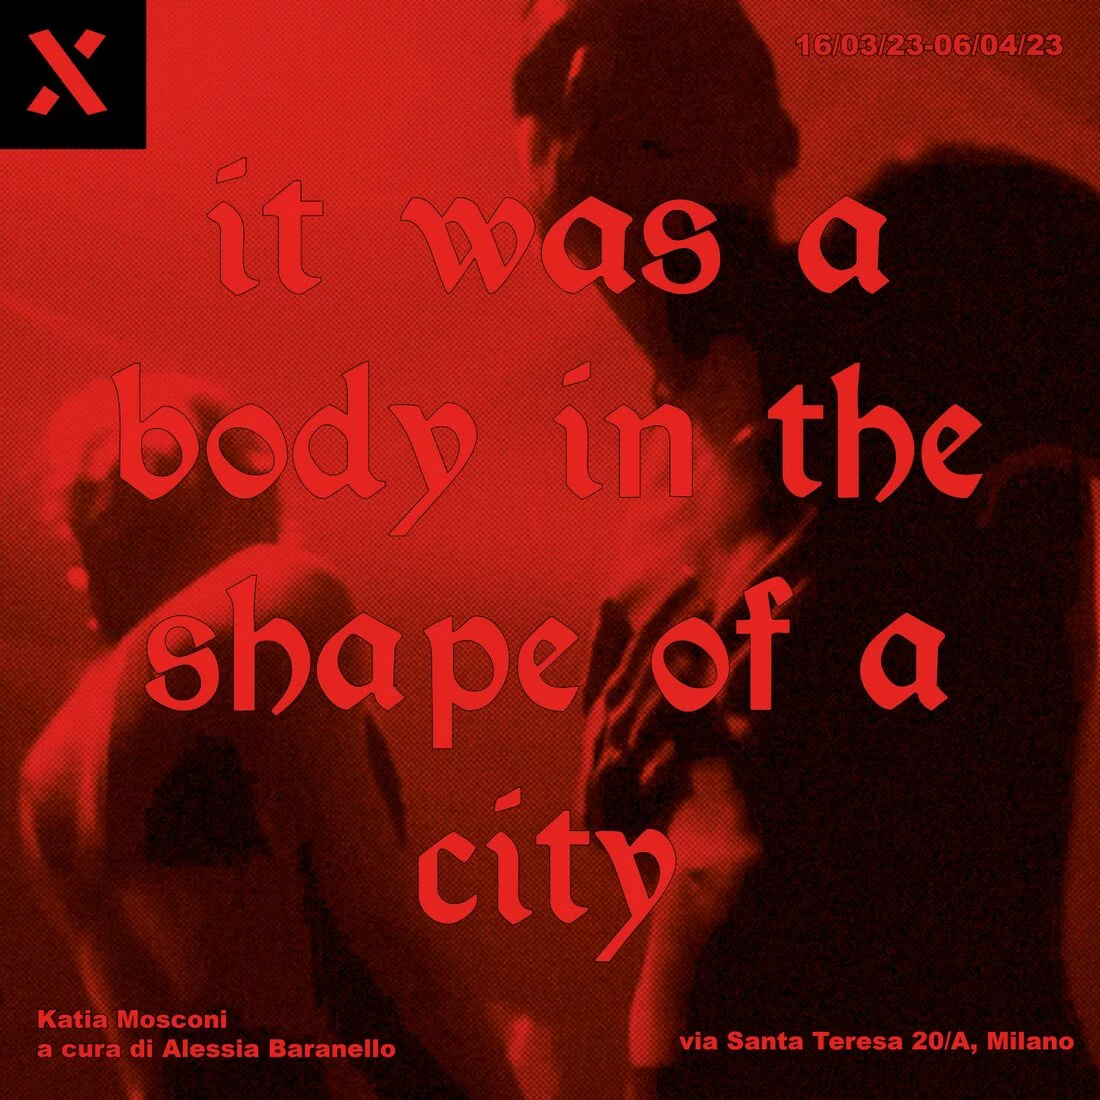 Katia Mosconi. It was a body in the shape of a city